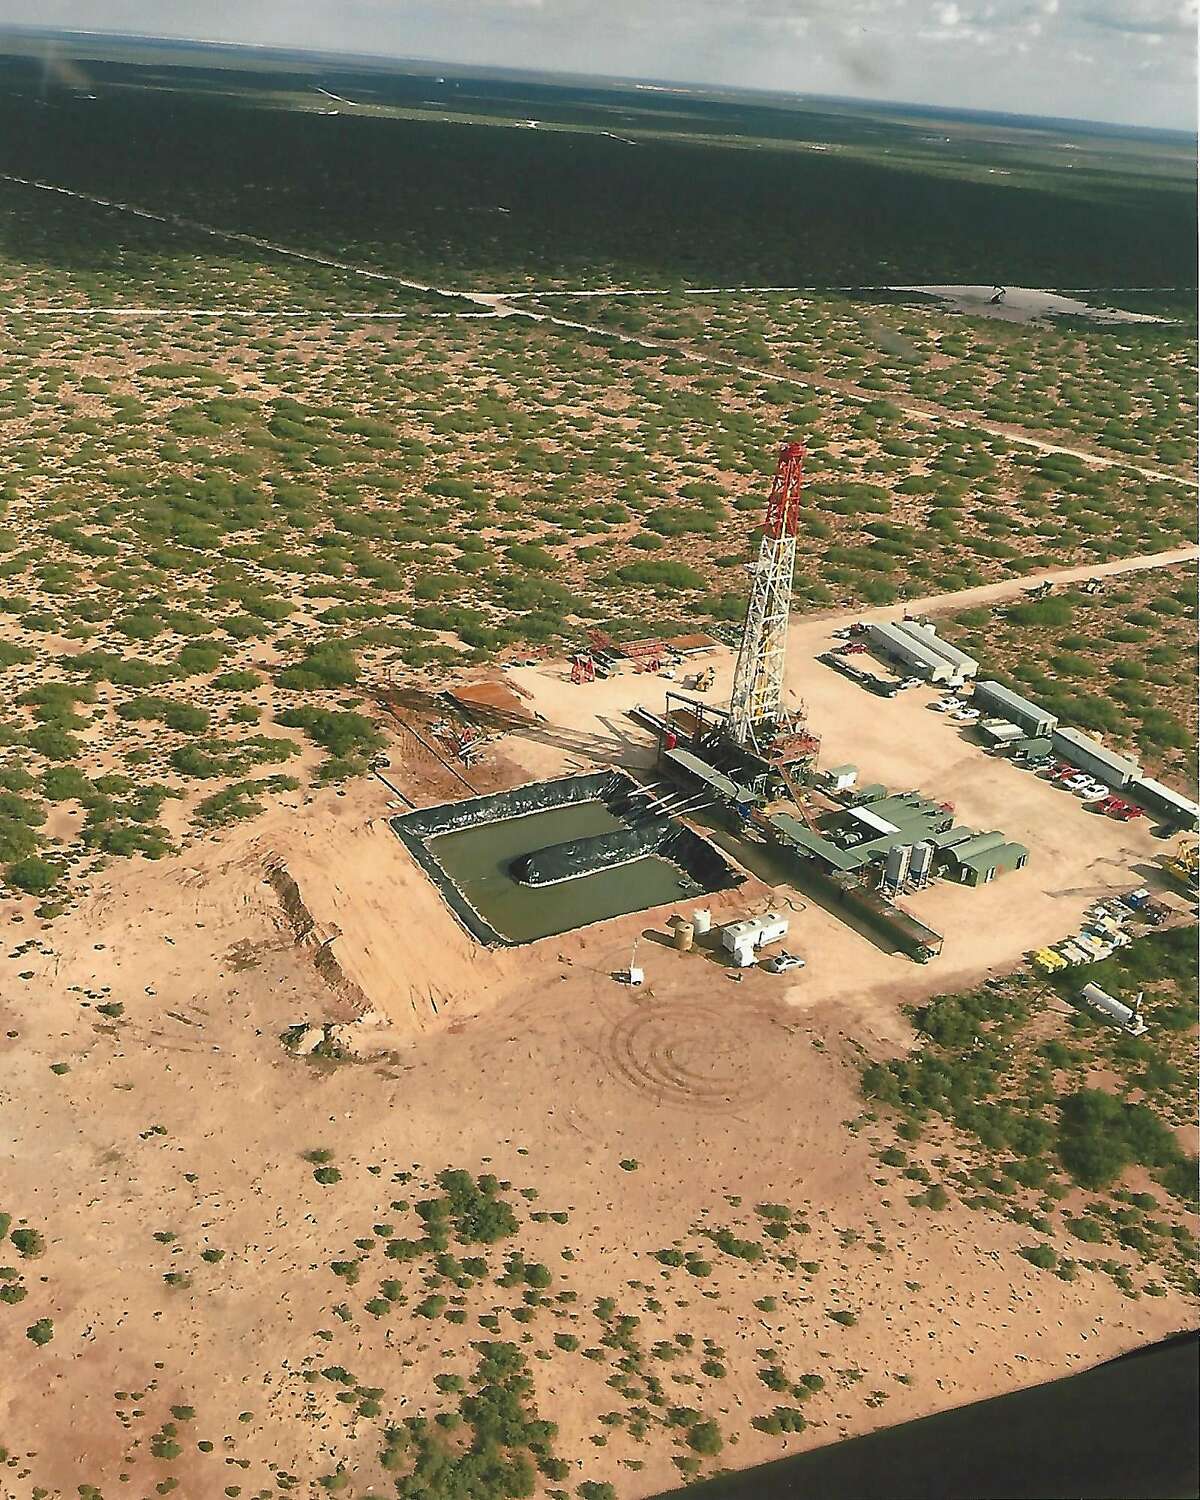 Lilis Energy, Inc. is a San Antonio-based independent oil and gas exploration and production company that operates in the Permian’s Delaware Basin and in the Denver-Julesburg Basin. Seen here is Lilis' Bison #1H well which started producing oil on Jan 19, 2017 .